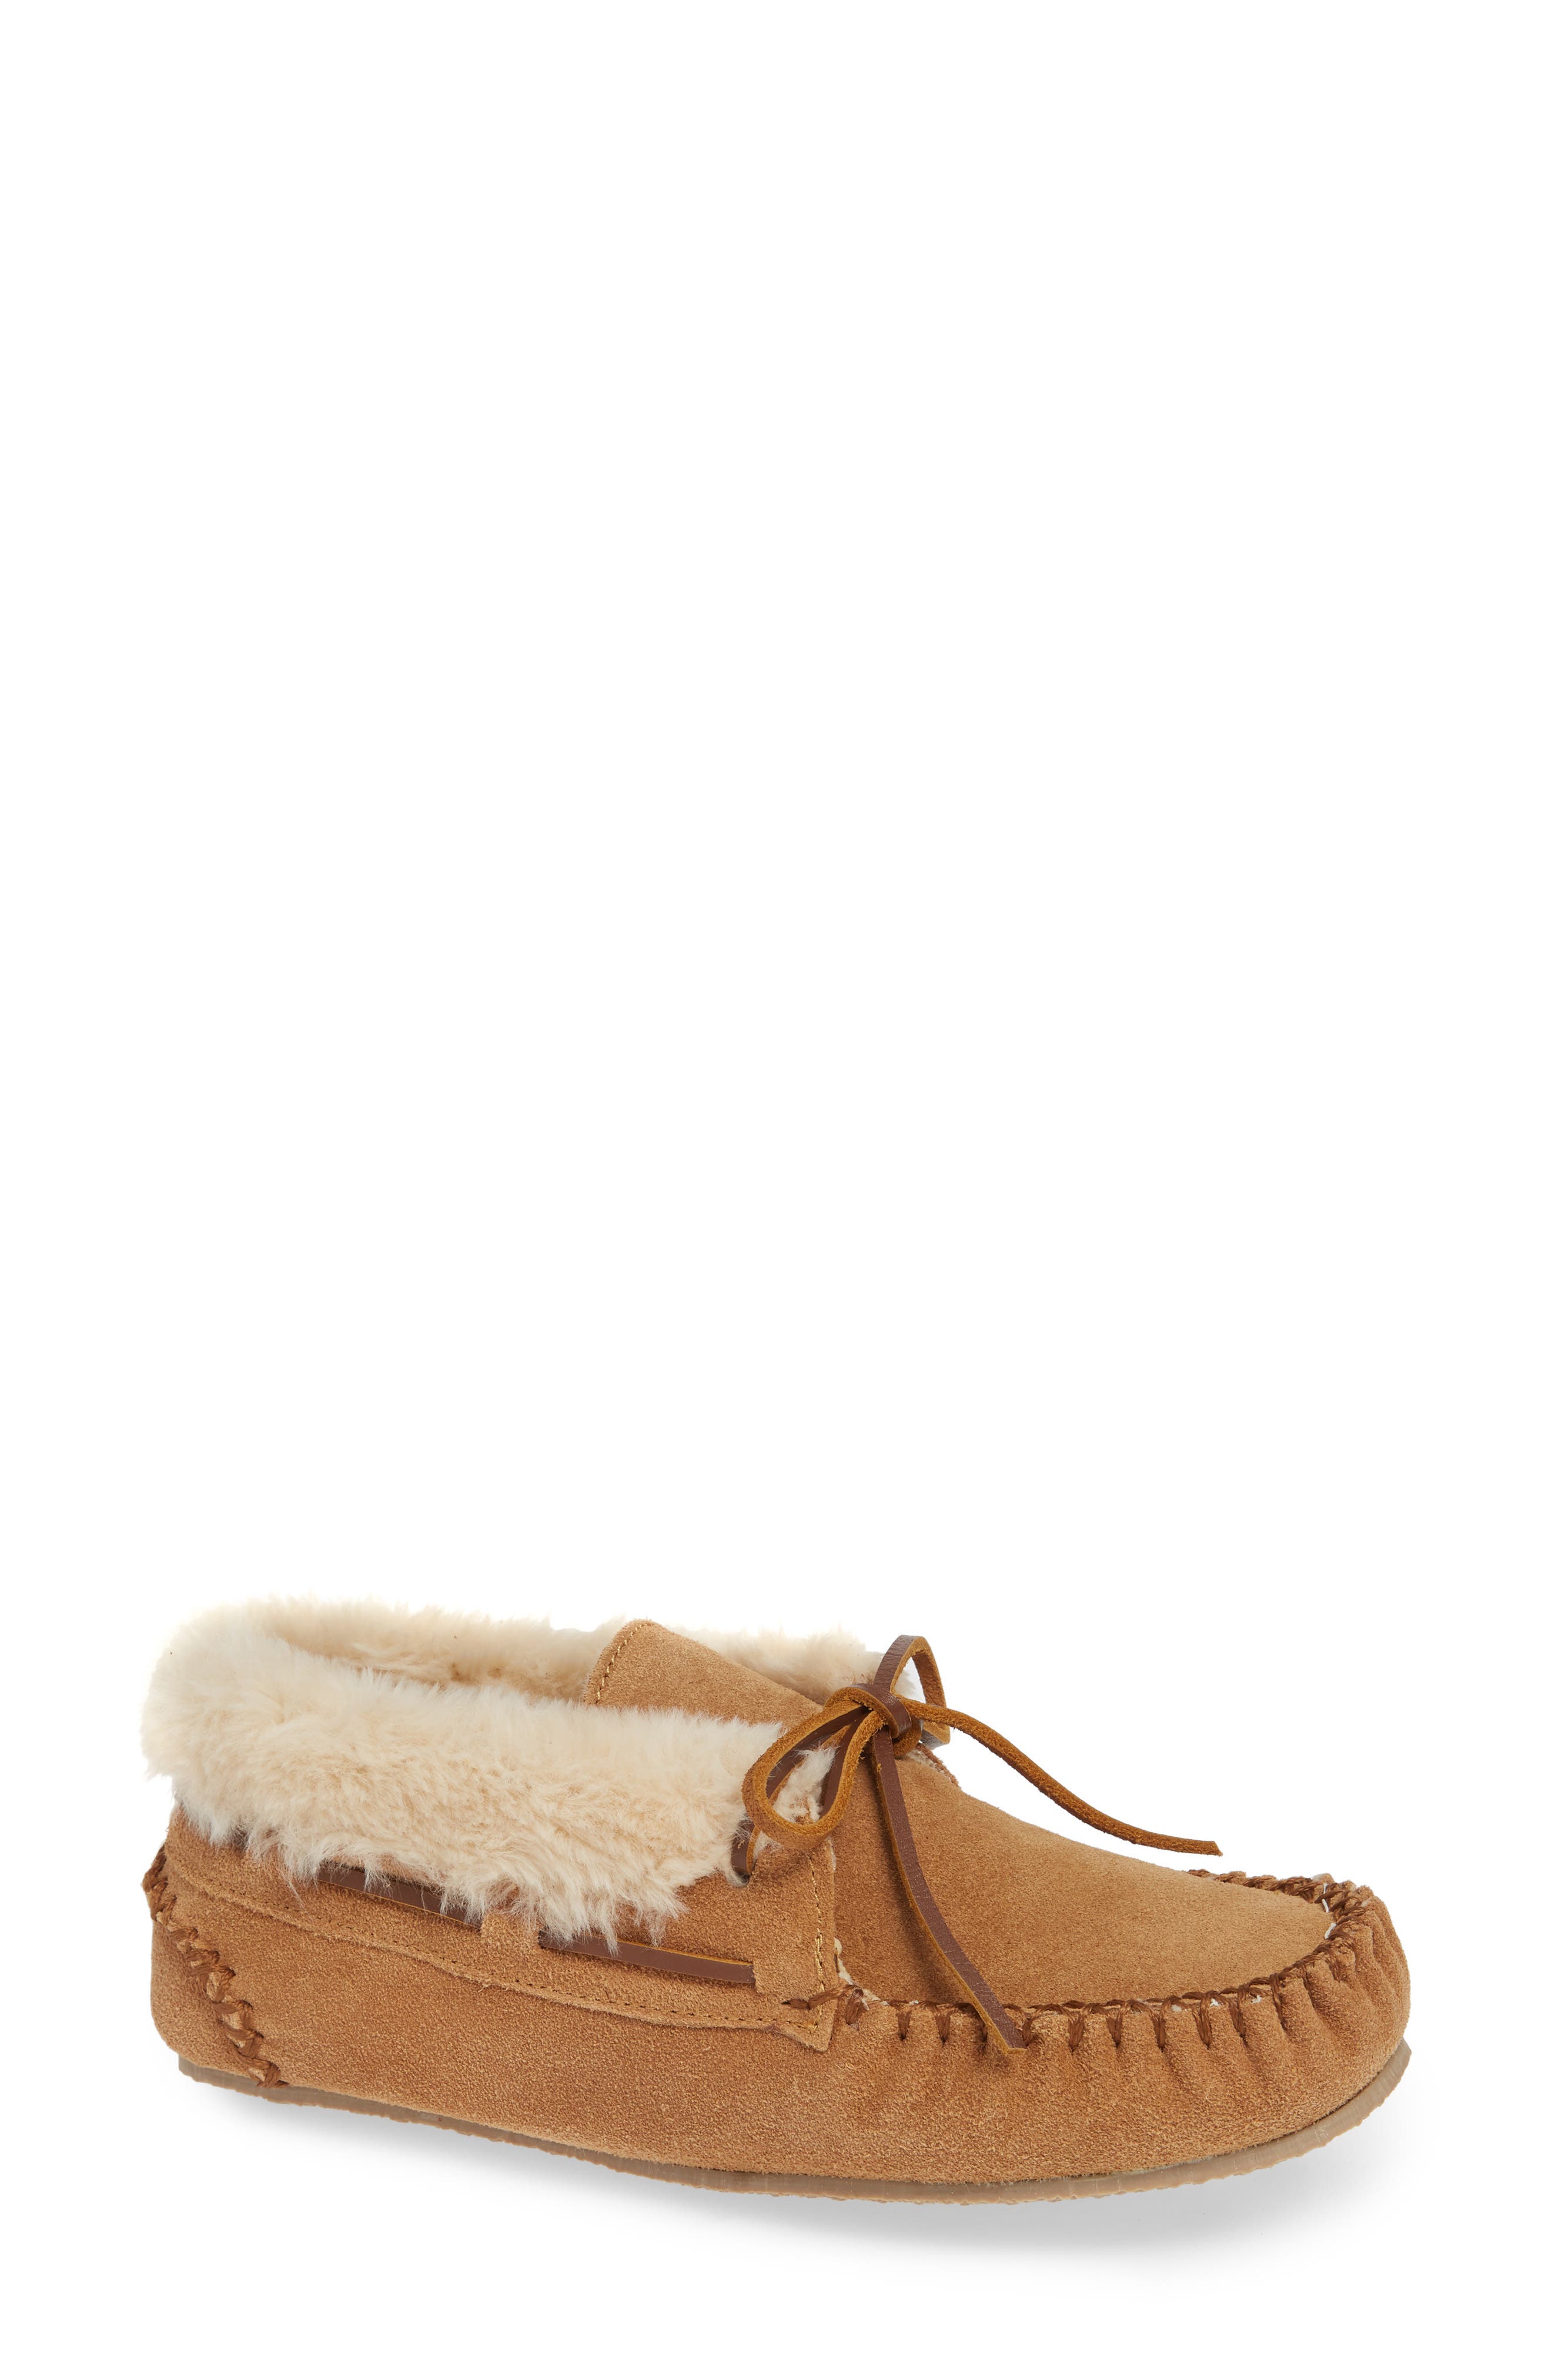 womens moccasin bootie slippers